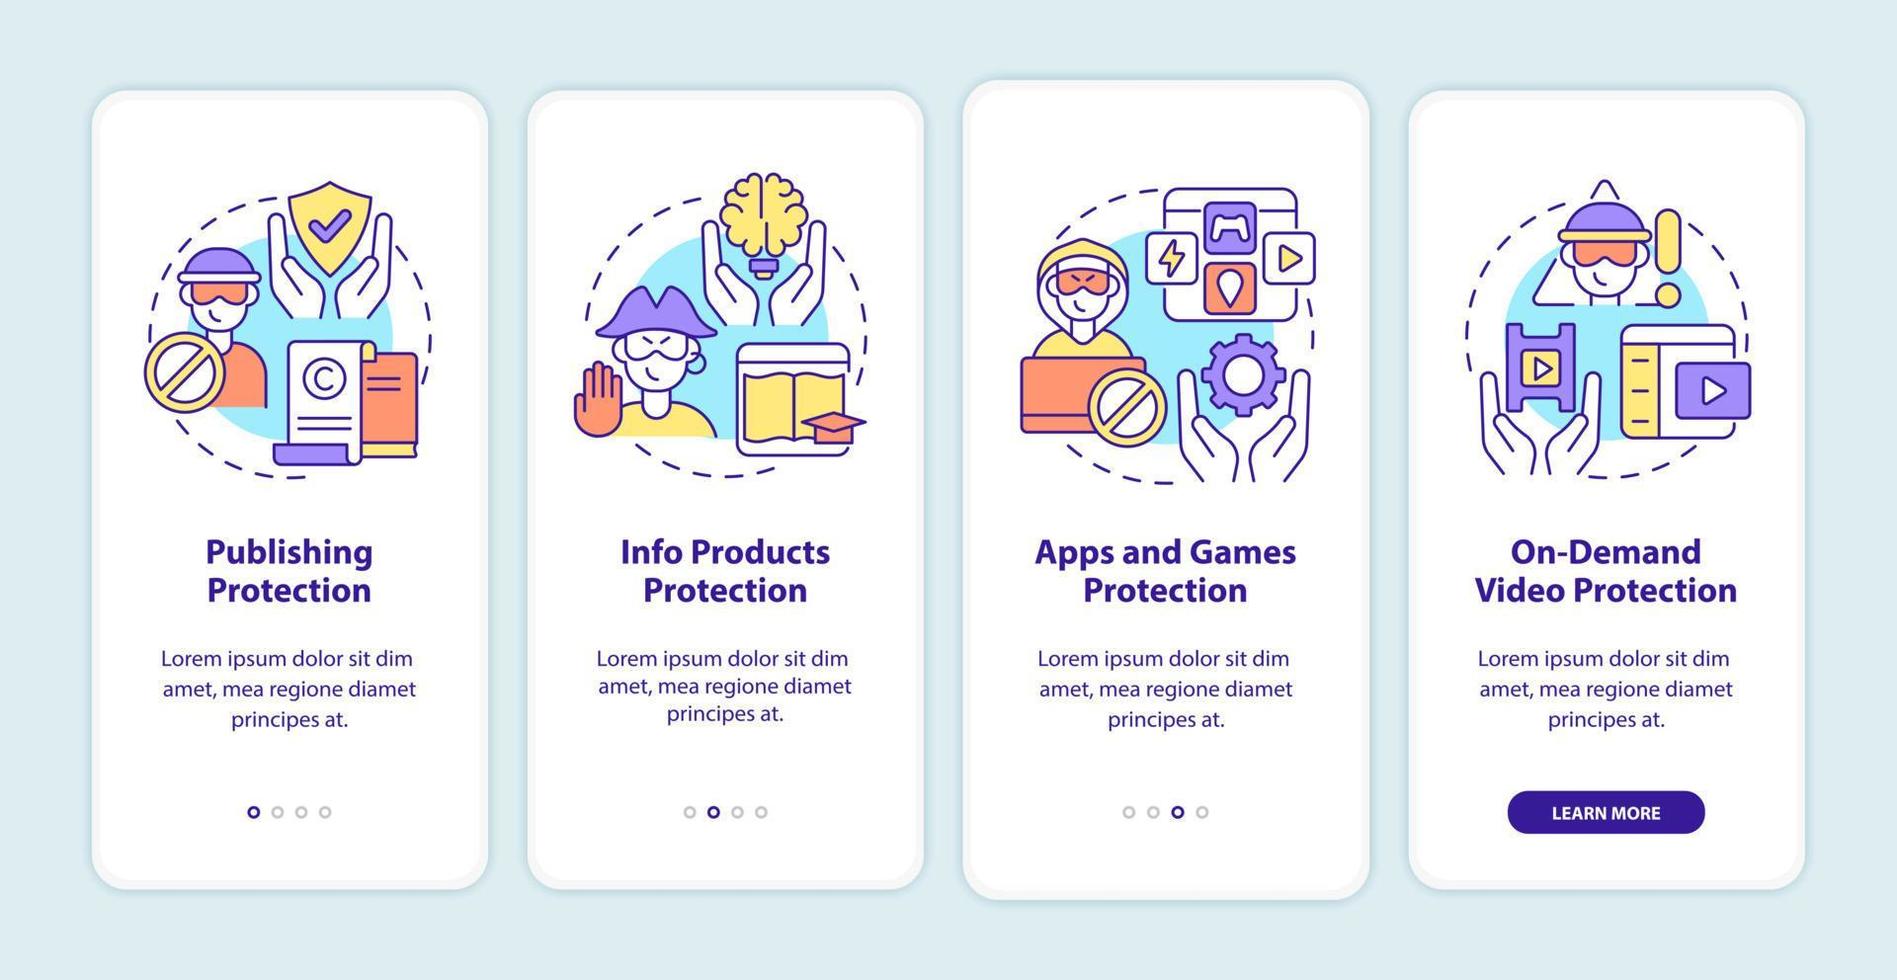 Content to protect from piracy onboarding mobile app page screen. Apps and games walkthrough 4 steps graphic instructions with concepts. UI, UX, GUI vector template with linear color illustrations